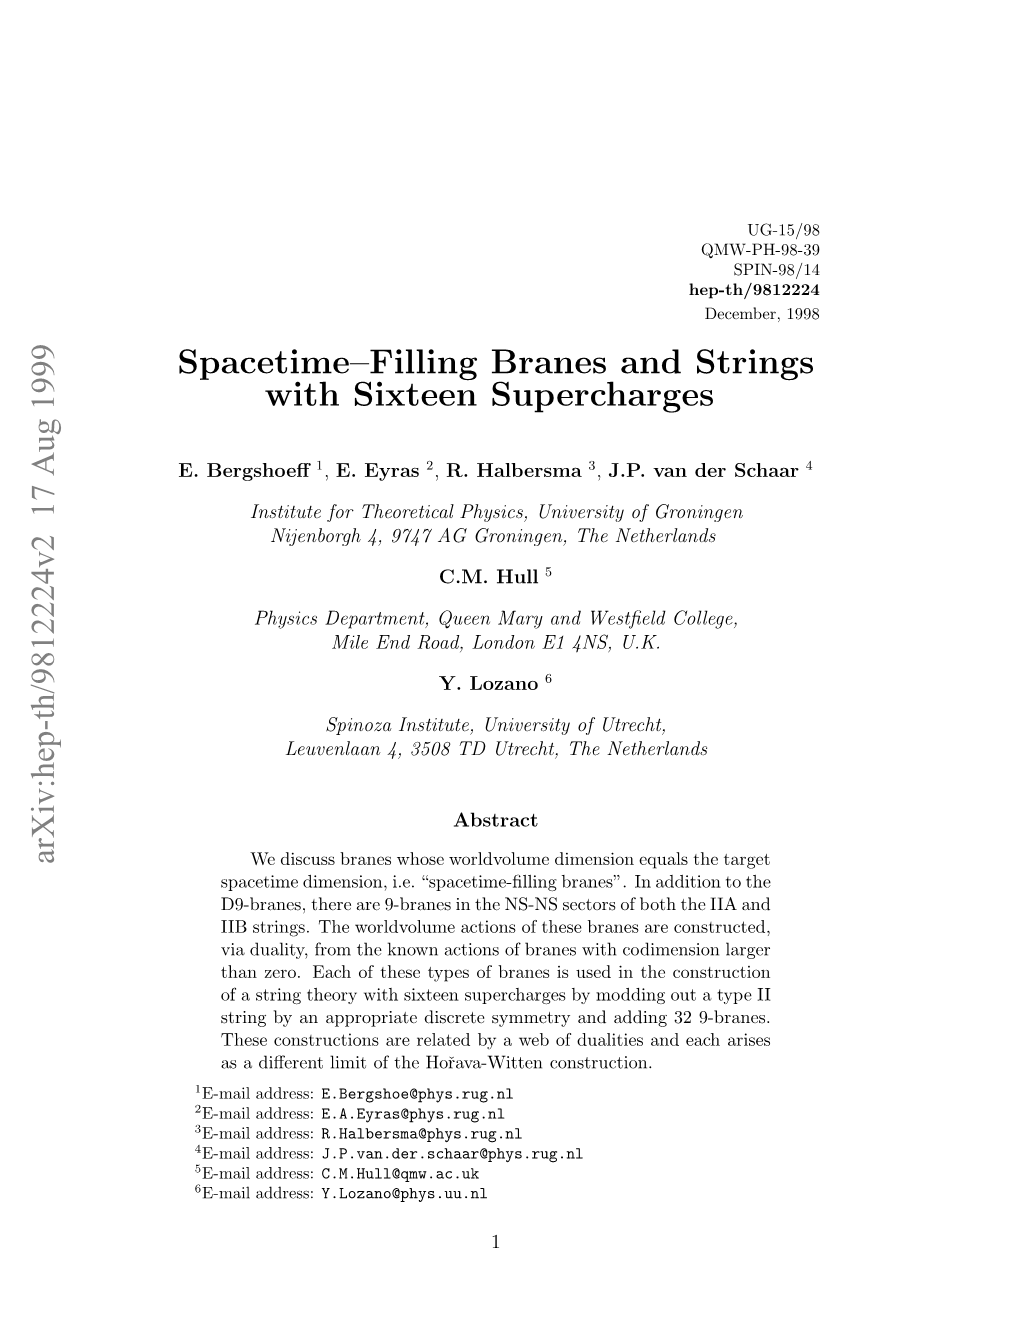 Spacetime–Filling Branes and Strings with Sixteen Supercharges